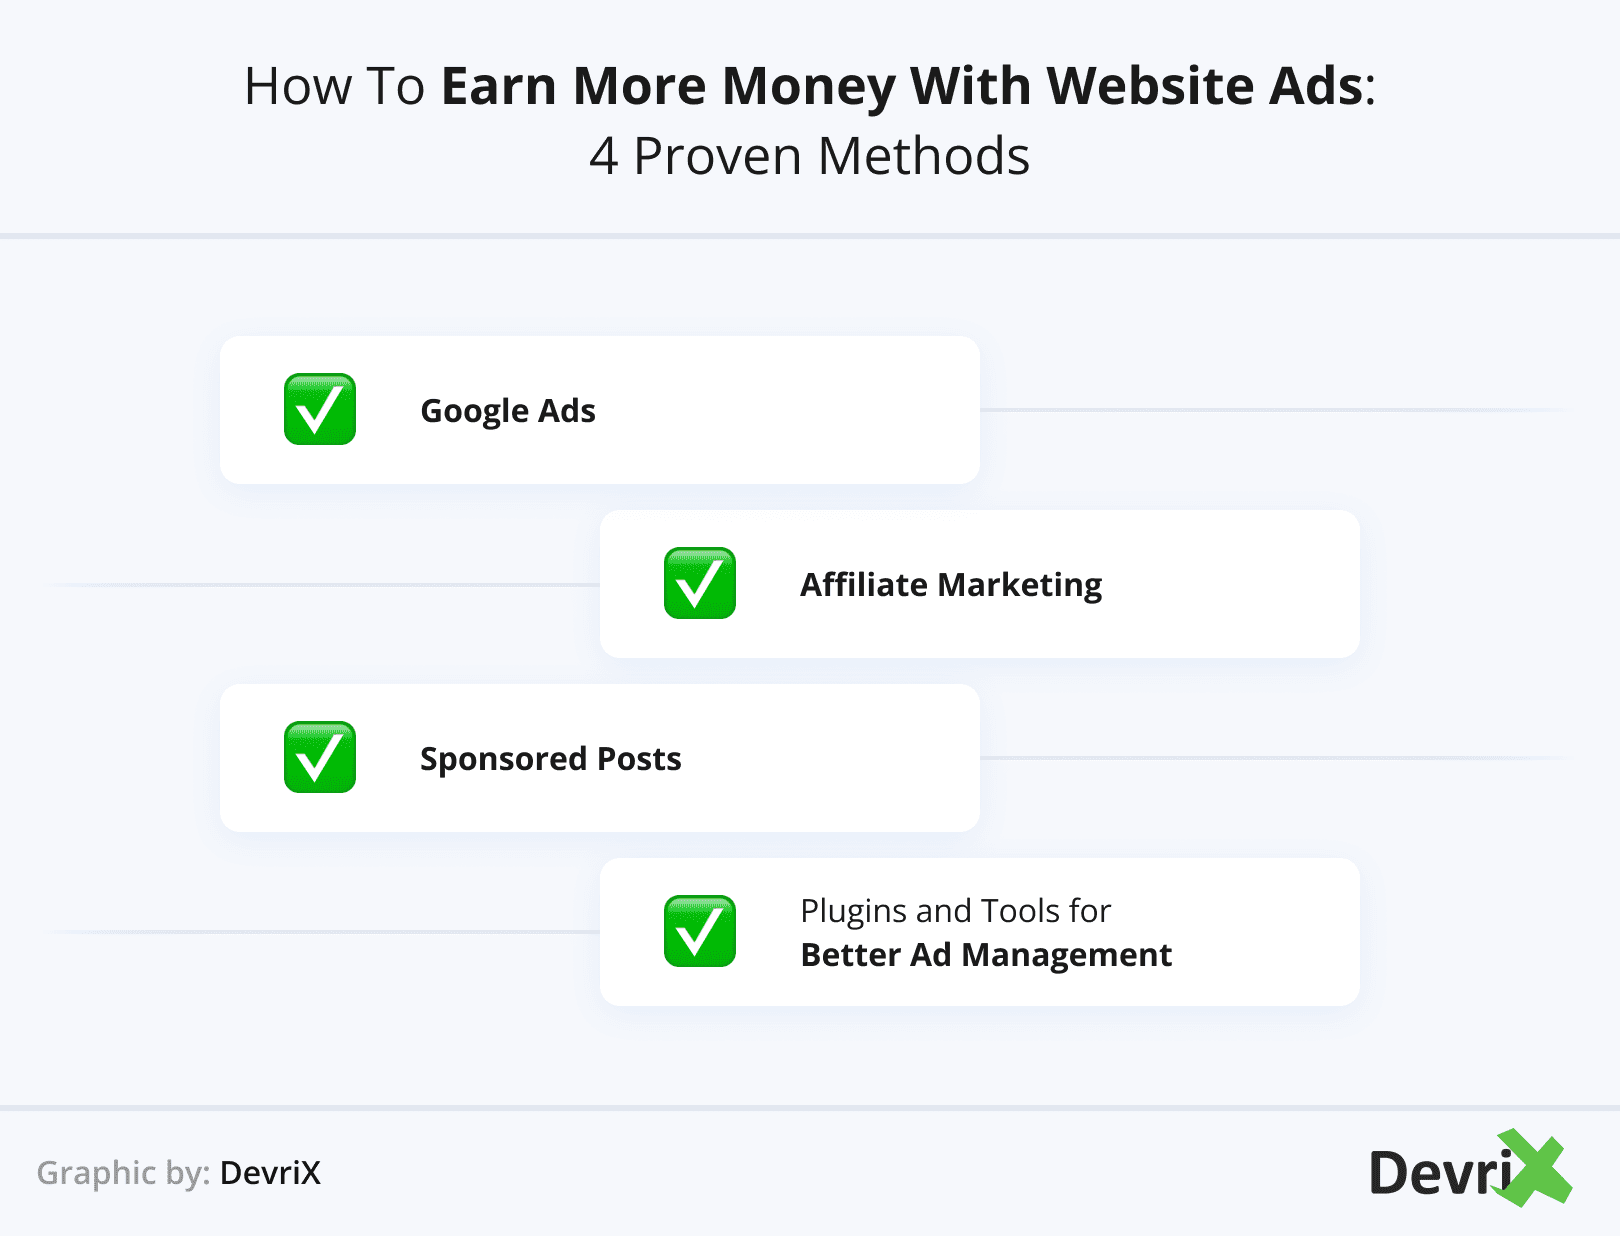 How to Earn More Money with Website Ads 4 Proven Methods